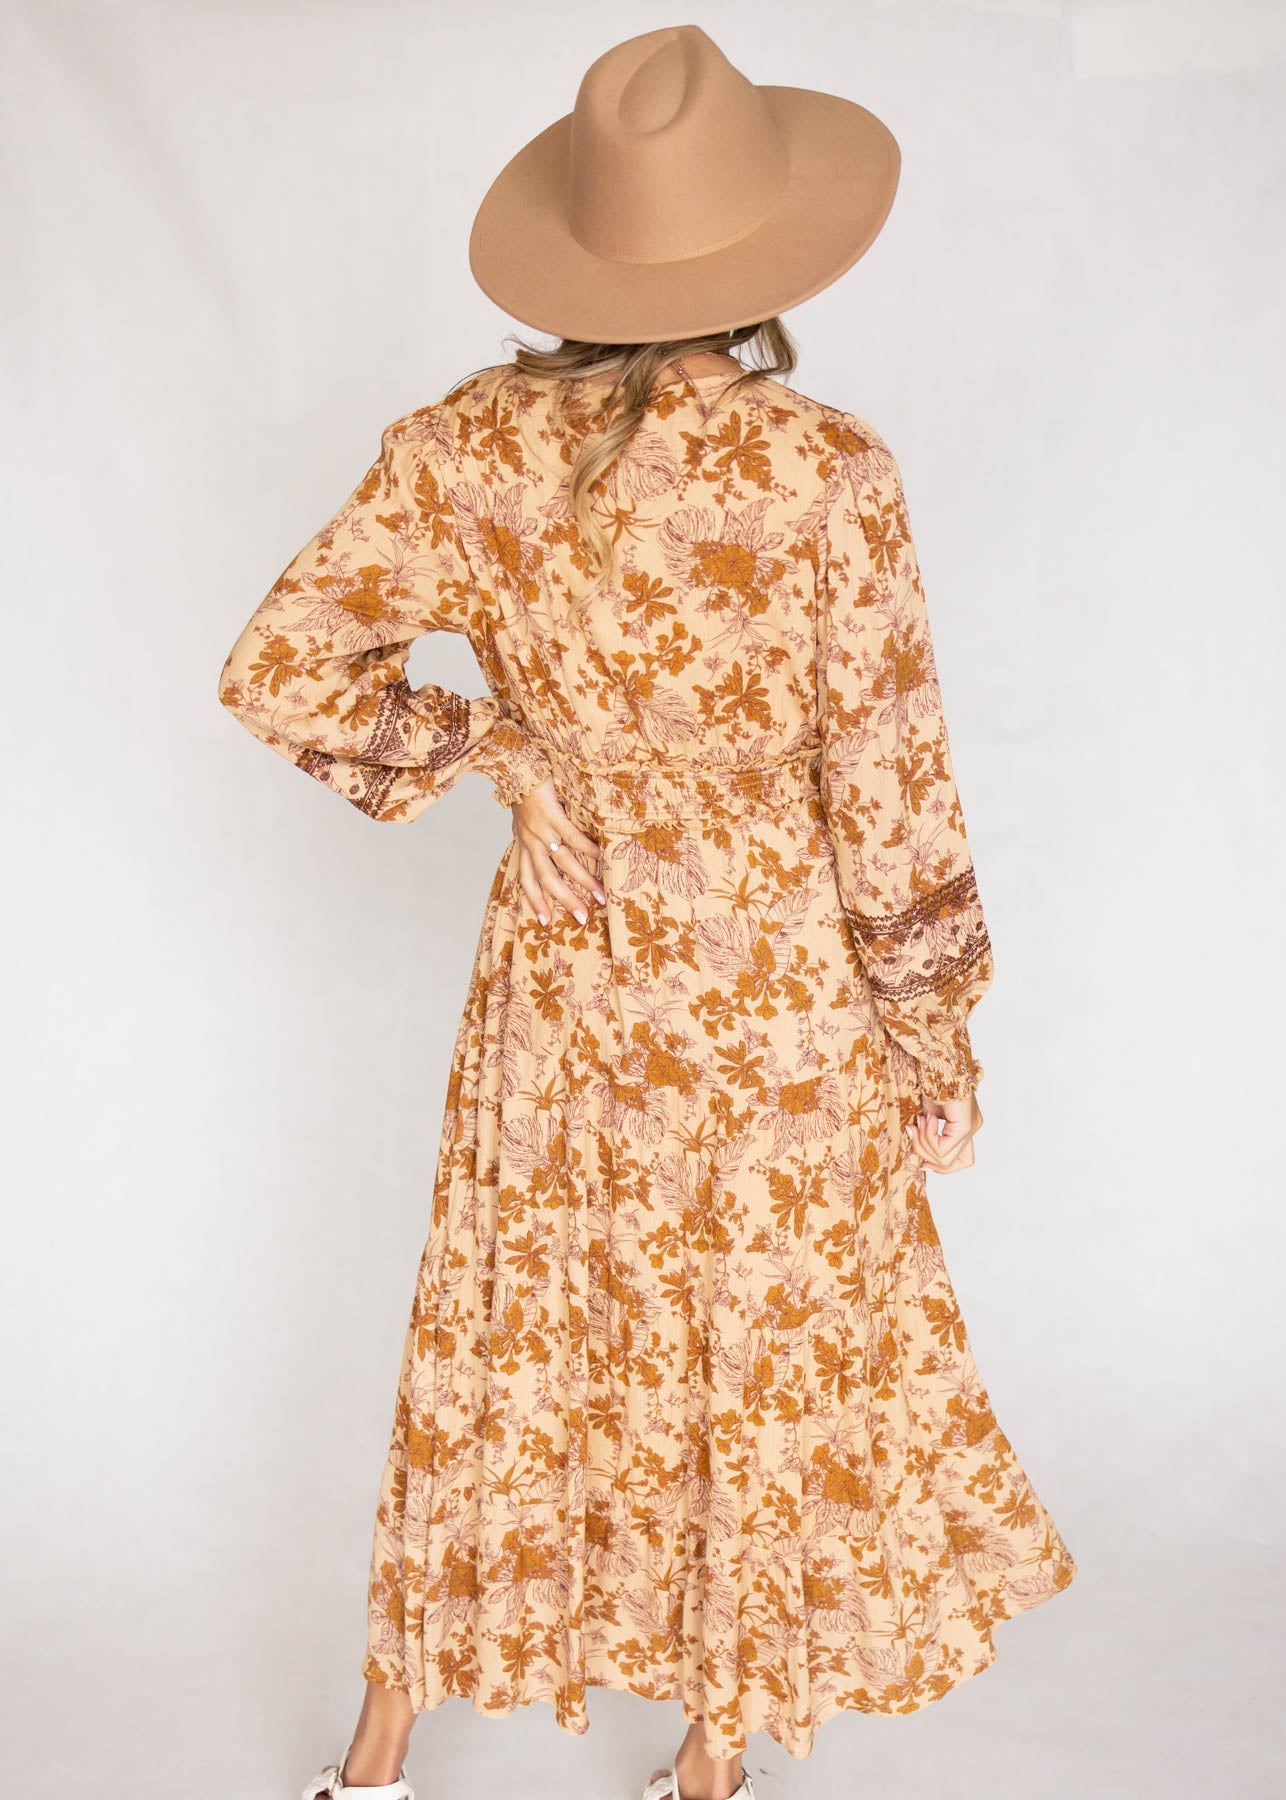 Back view of a camel dress